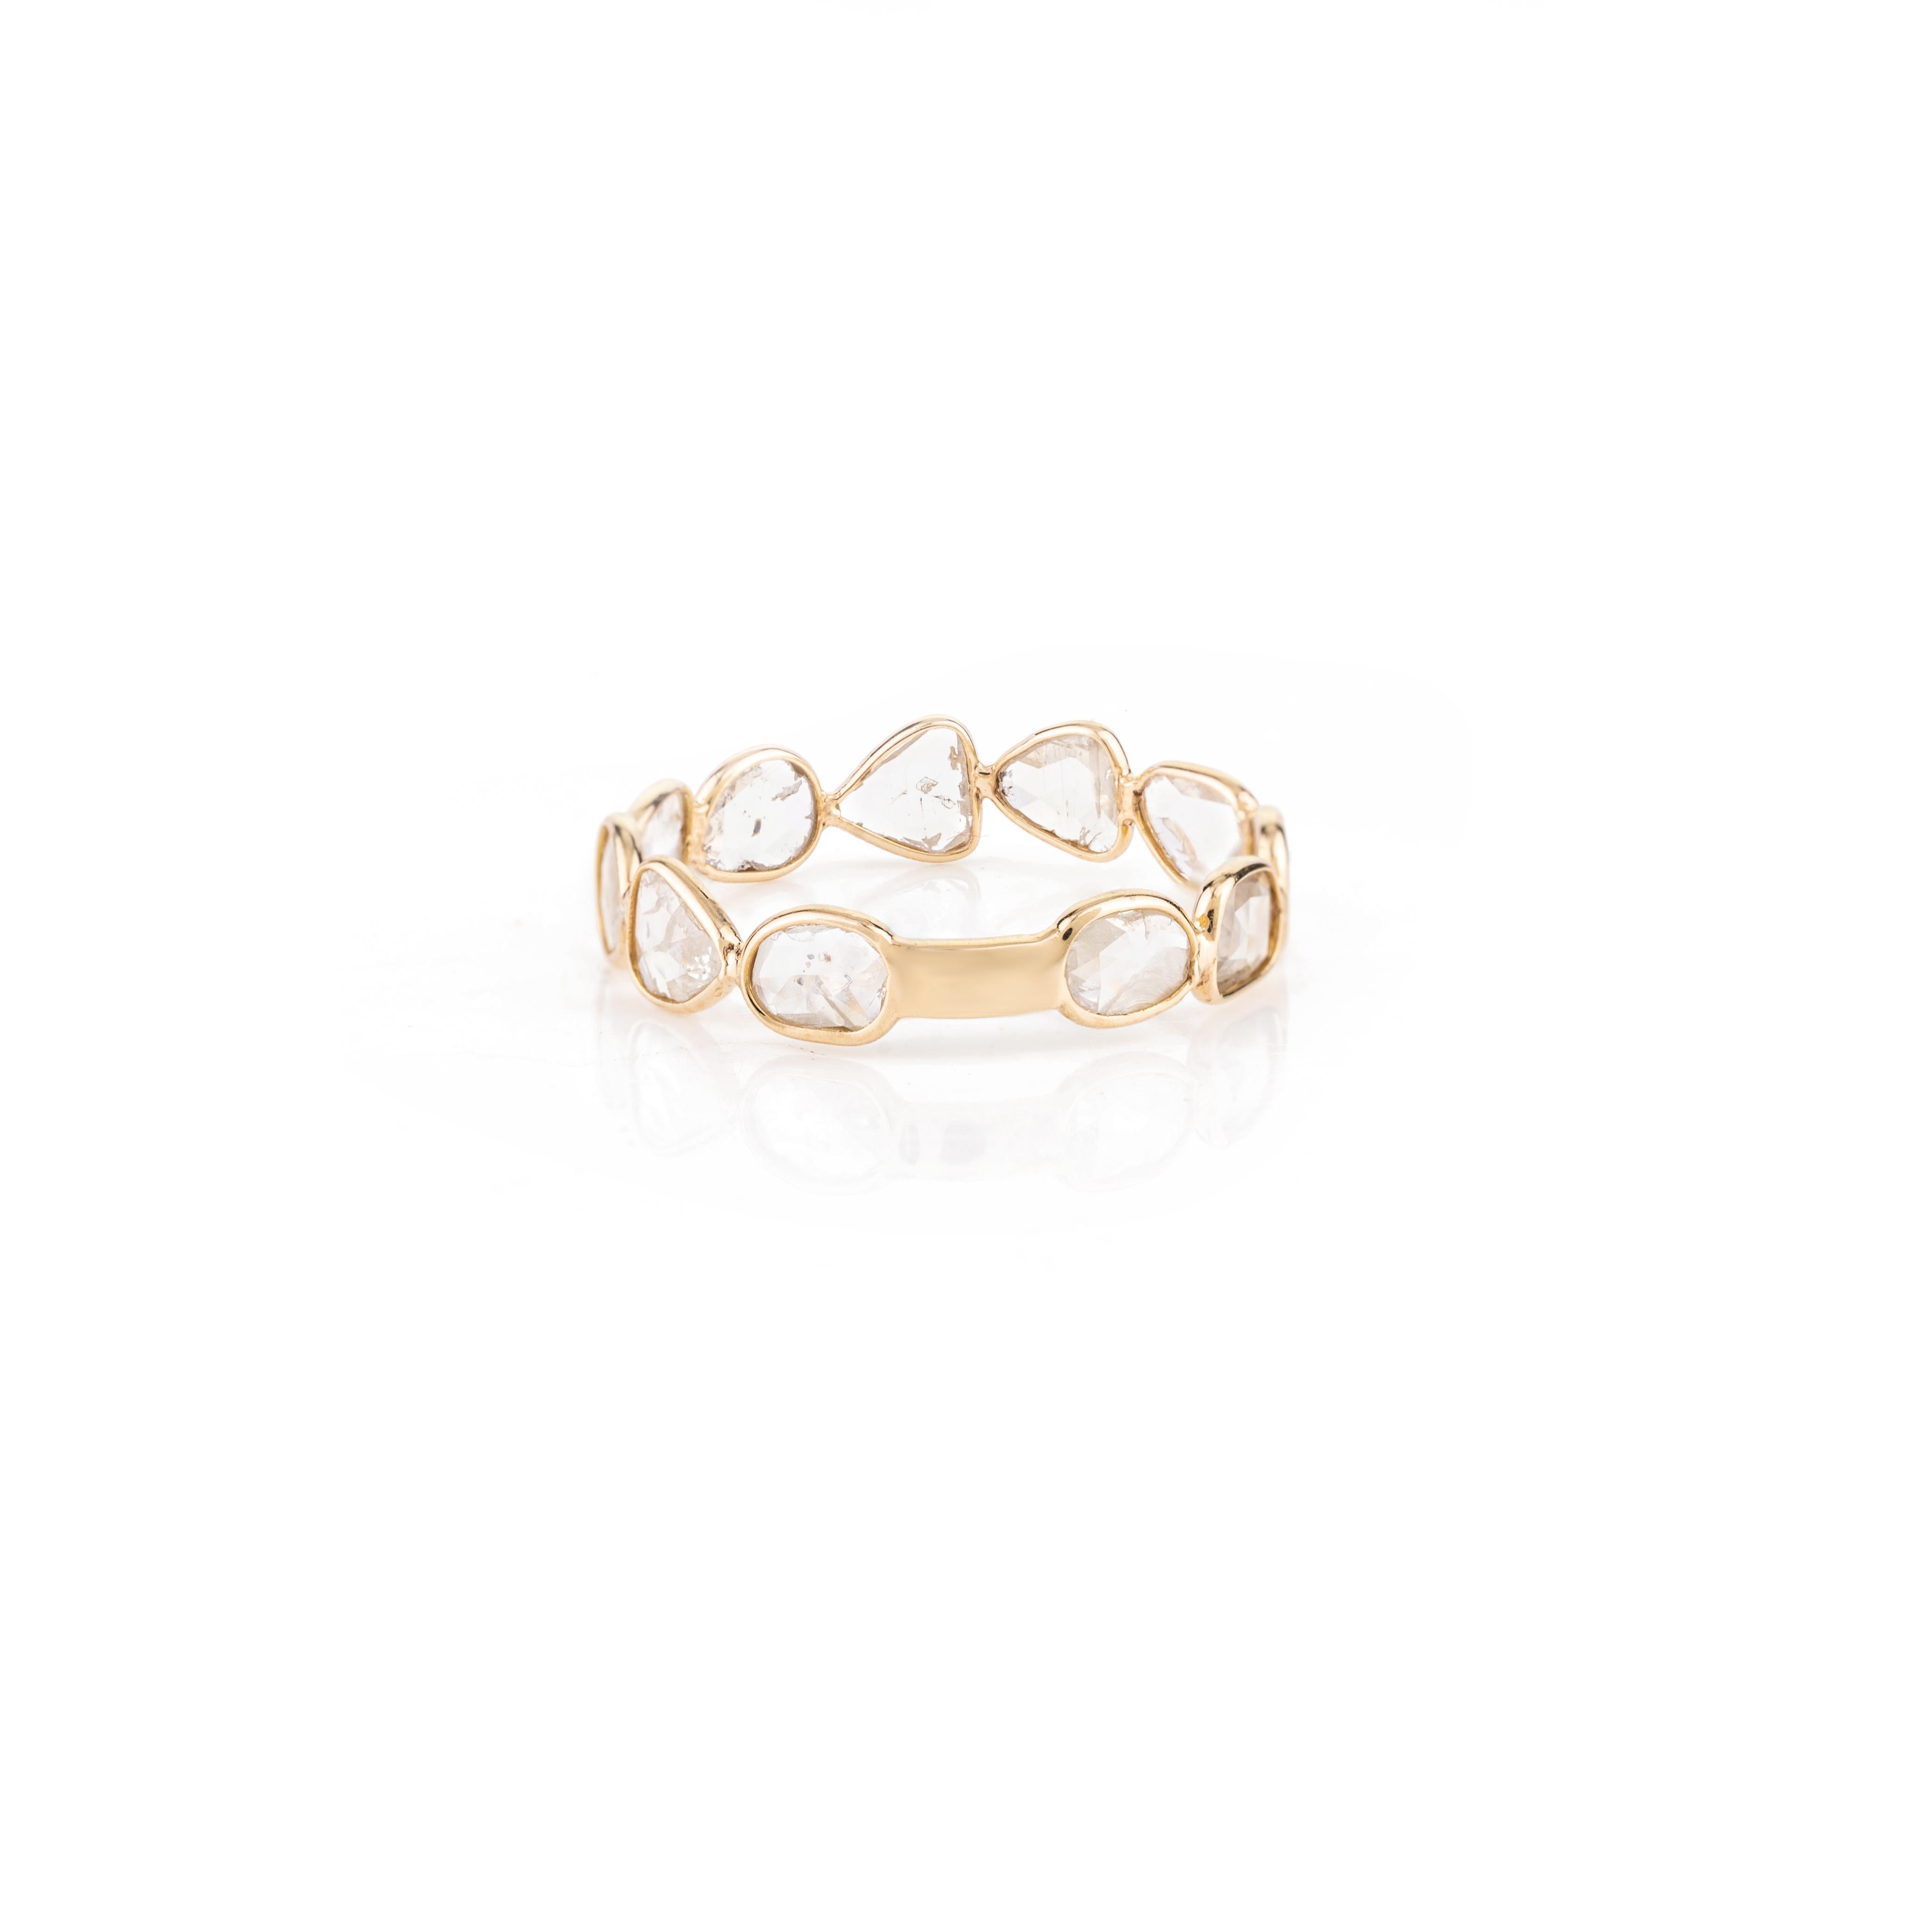 For Sale:  Natural Uncut Diamond 18k Yellow Gold Stacking Band Ring Gift for Her 5